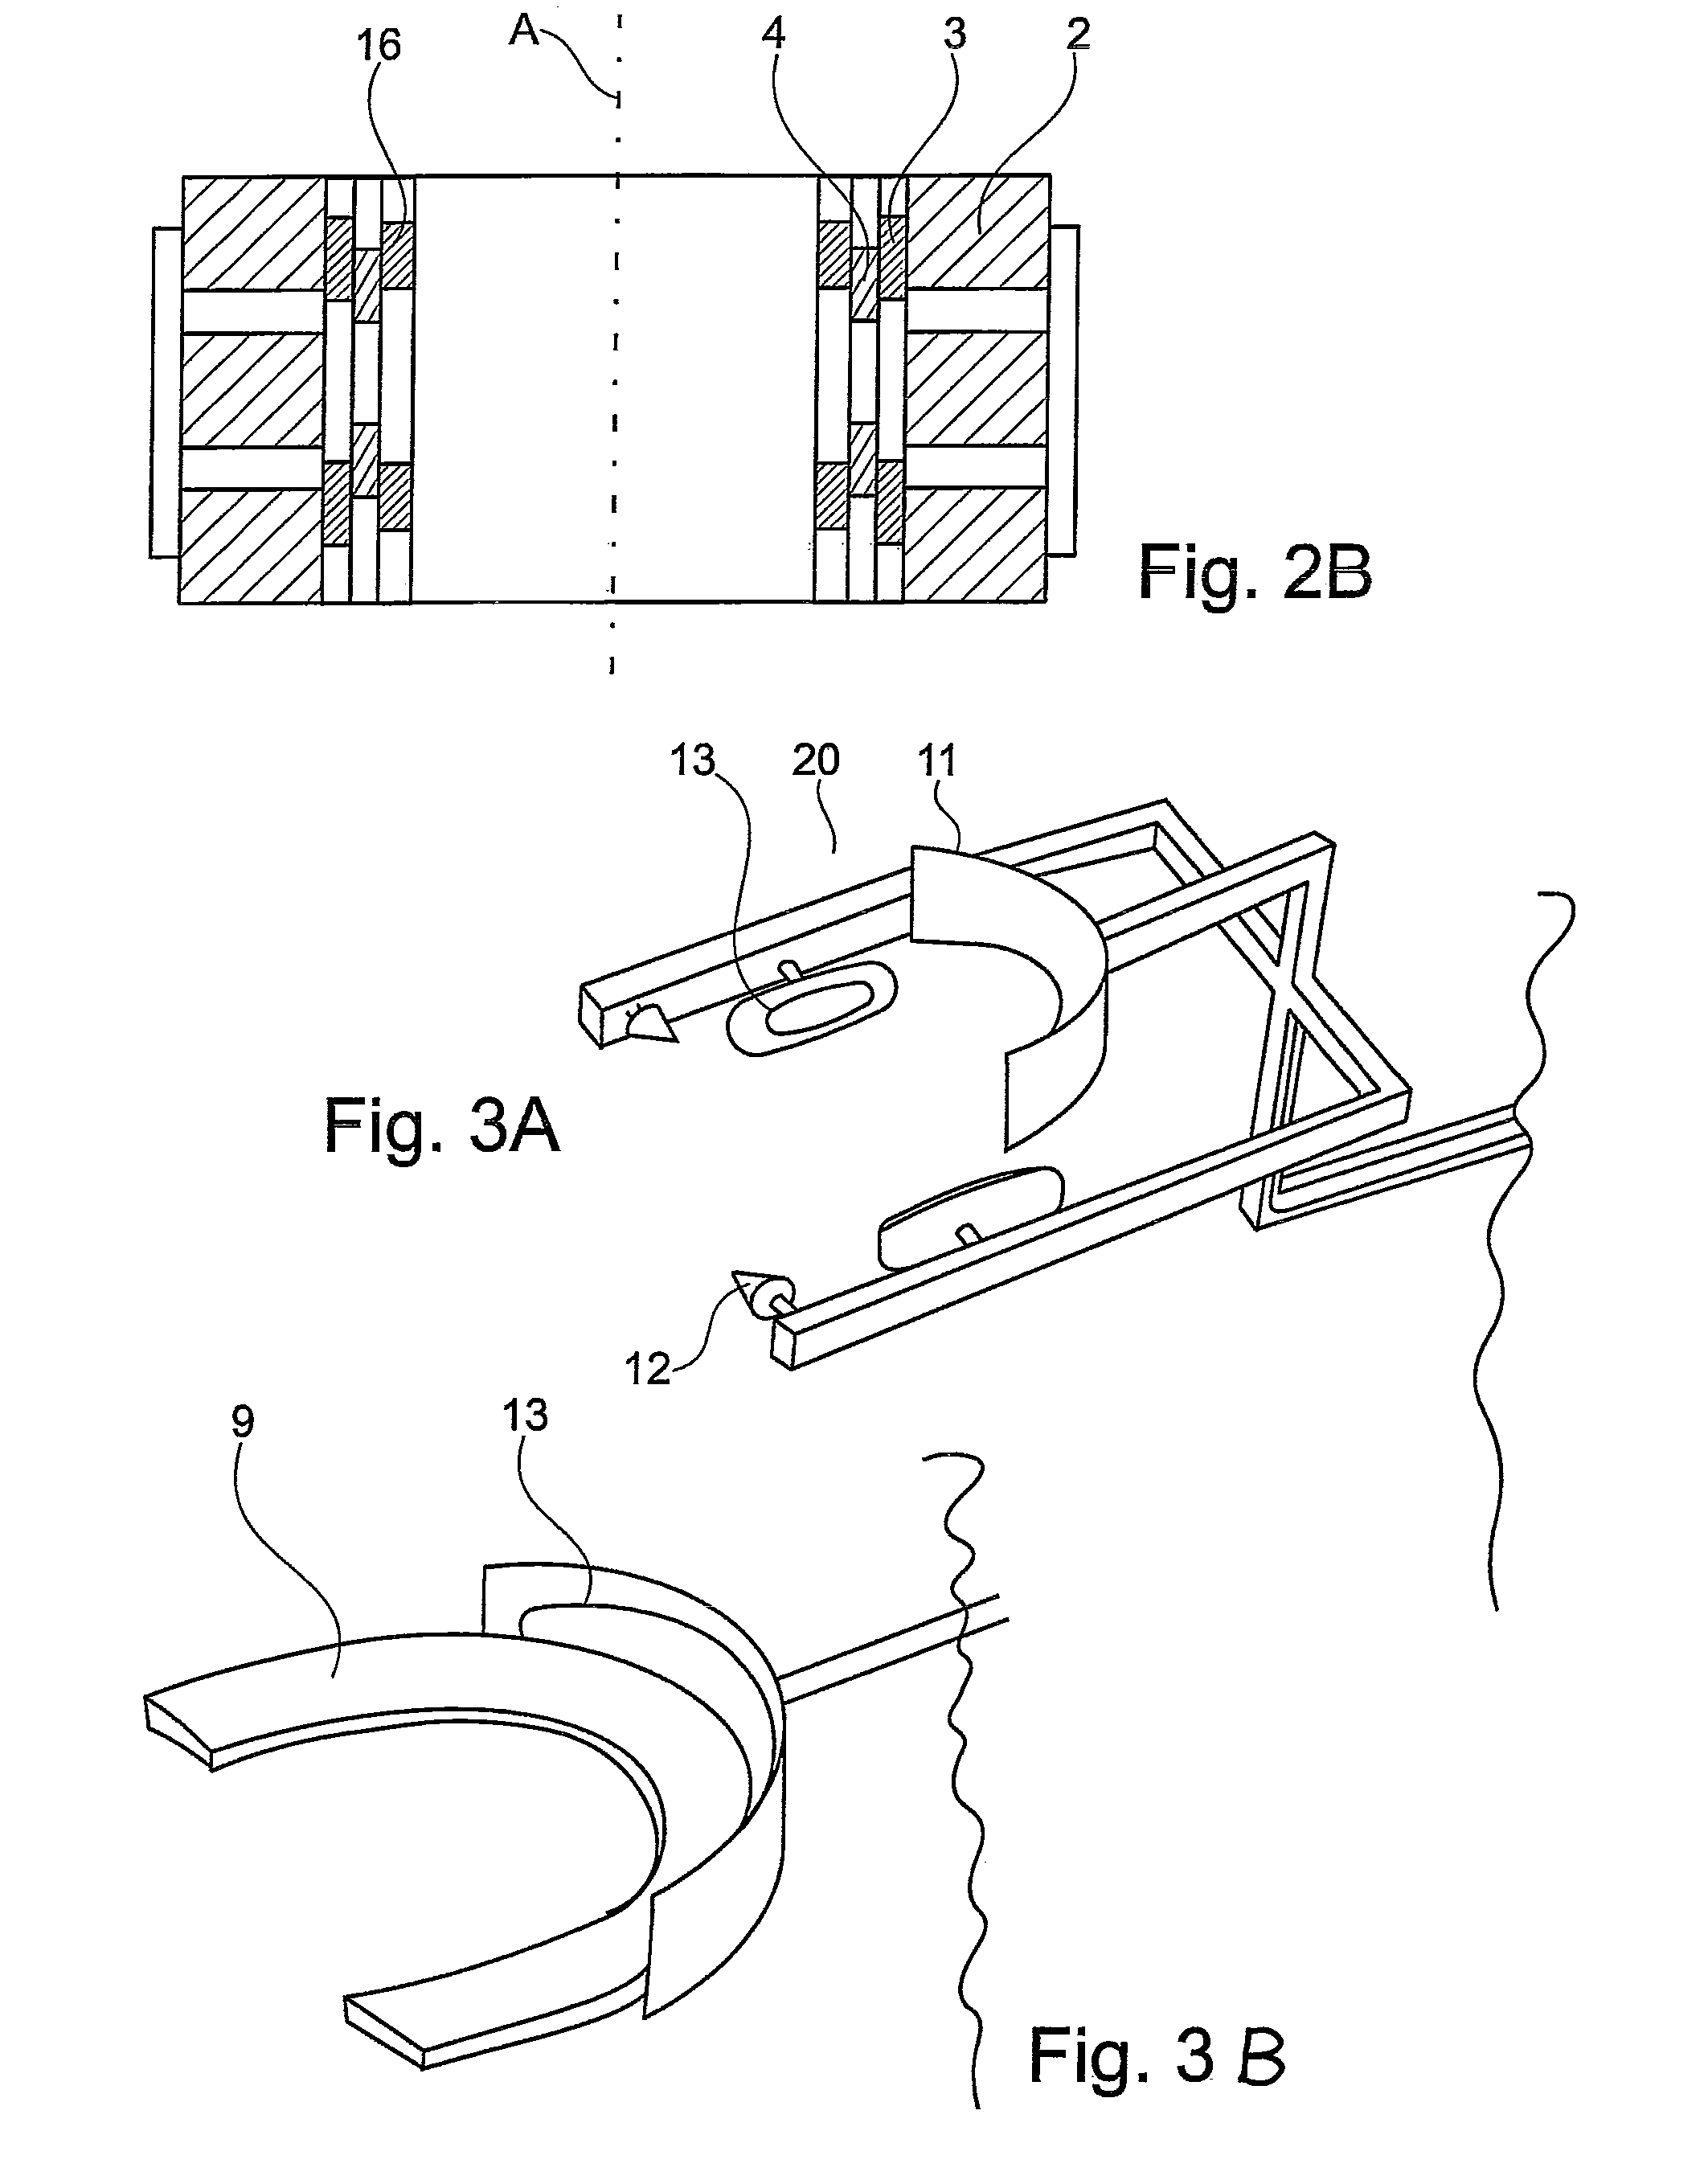 Magnetic field unit of an MRI system for image capturing a head region